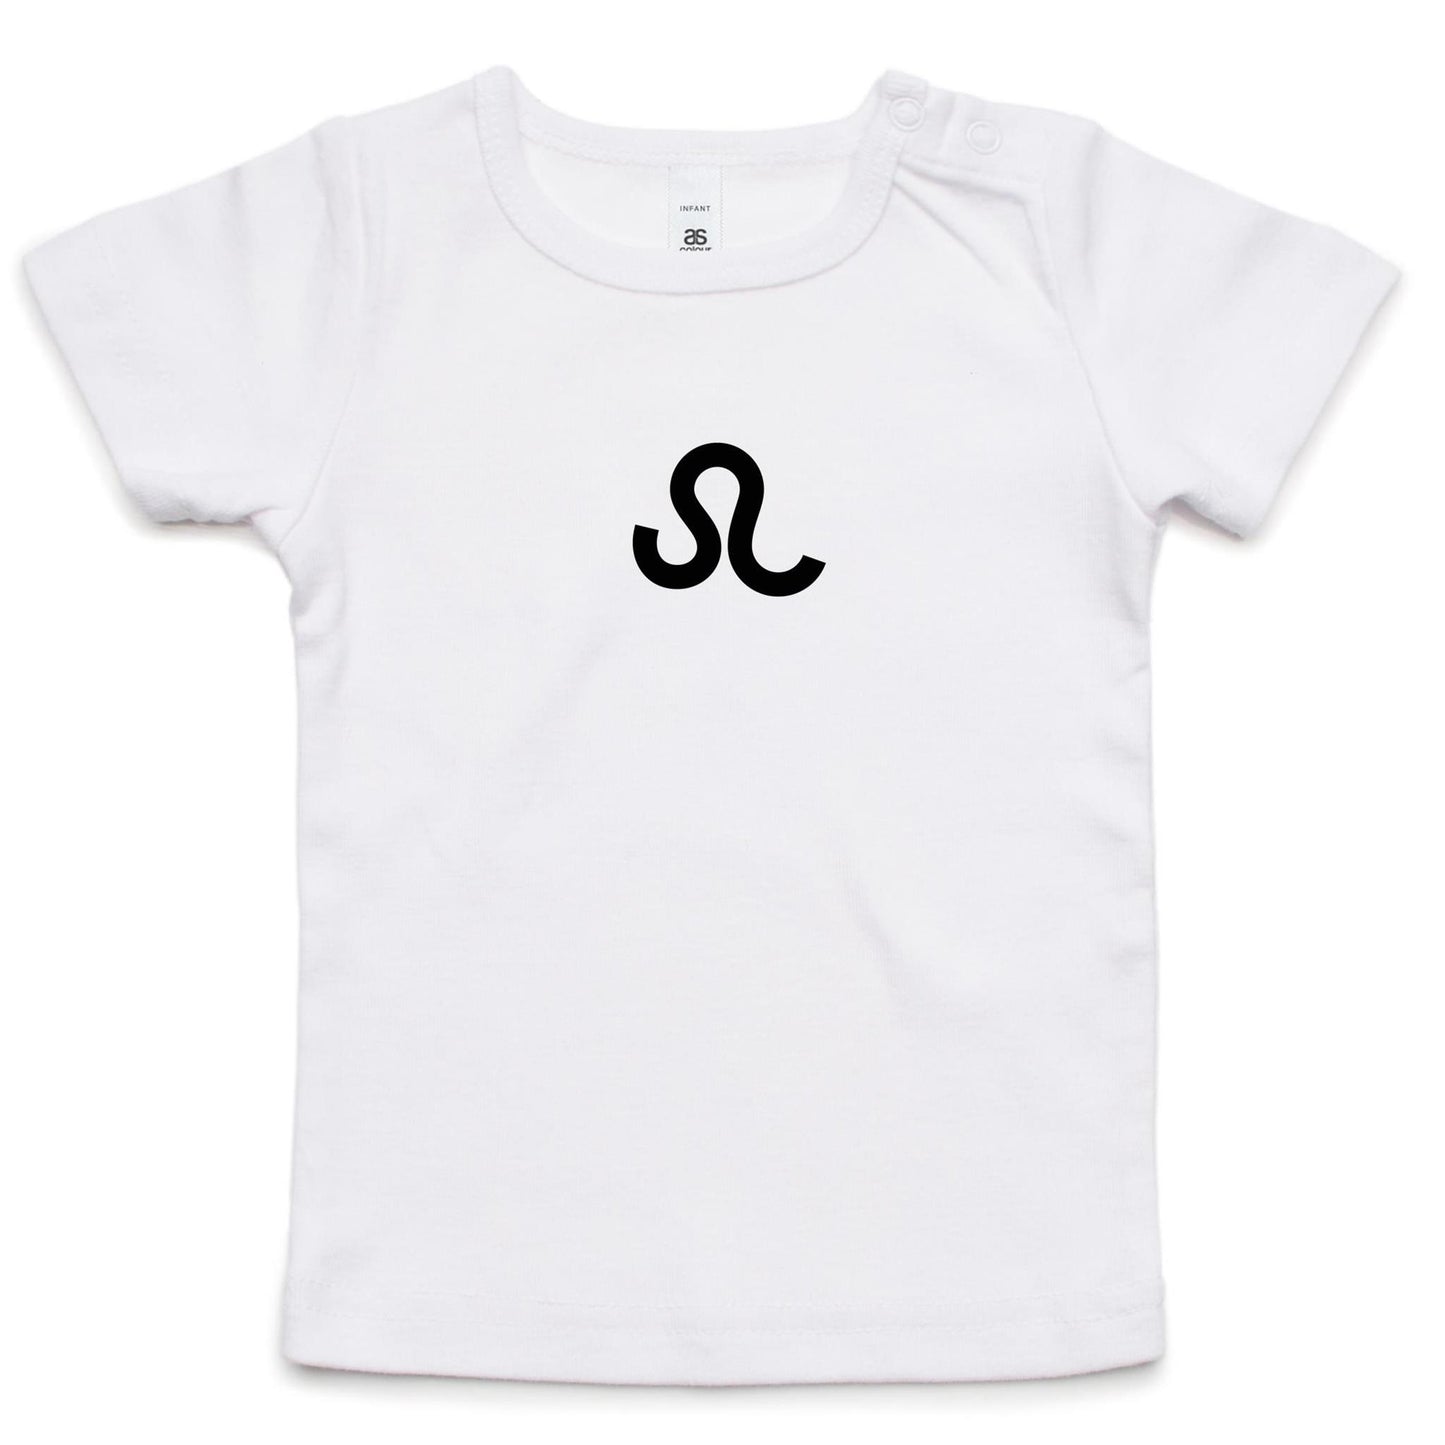 Leo T Shirts for Babies